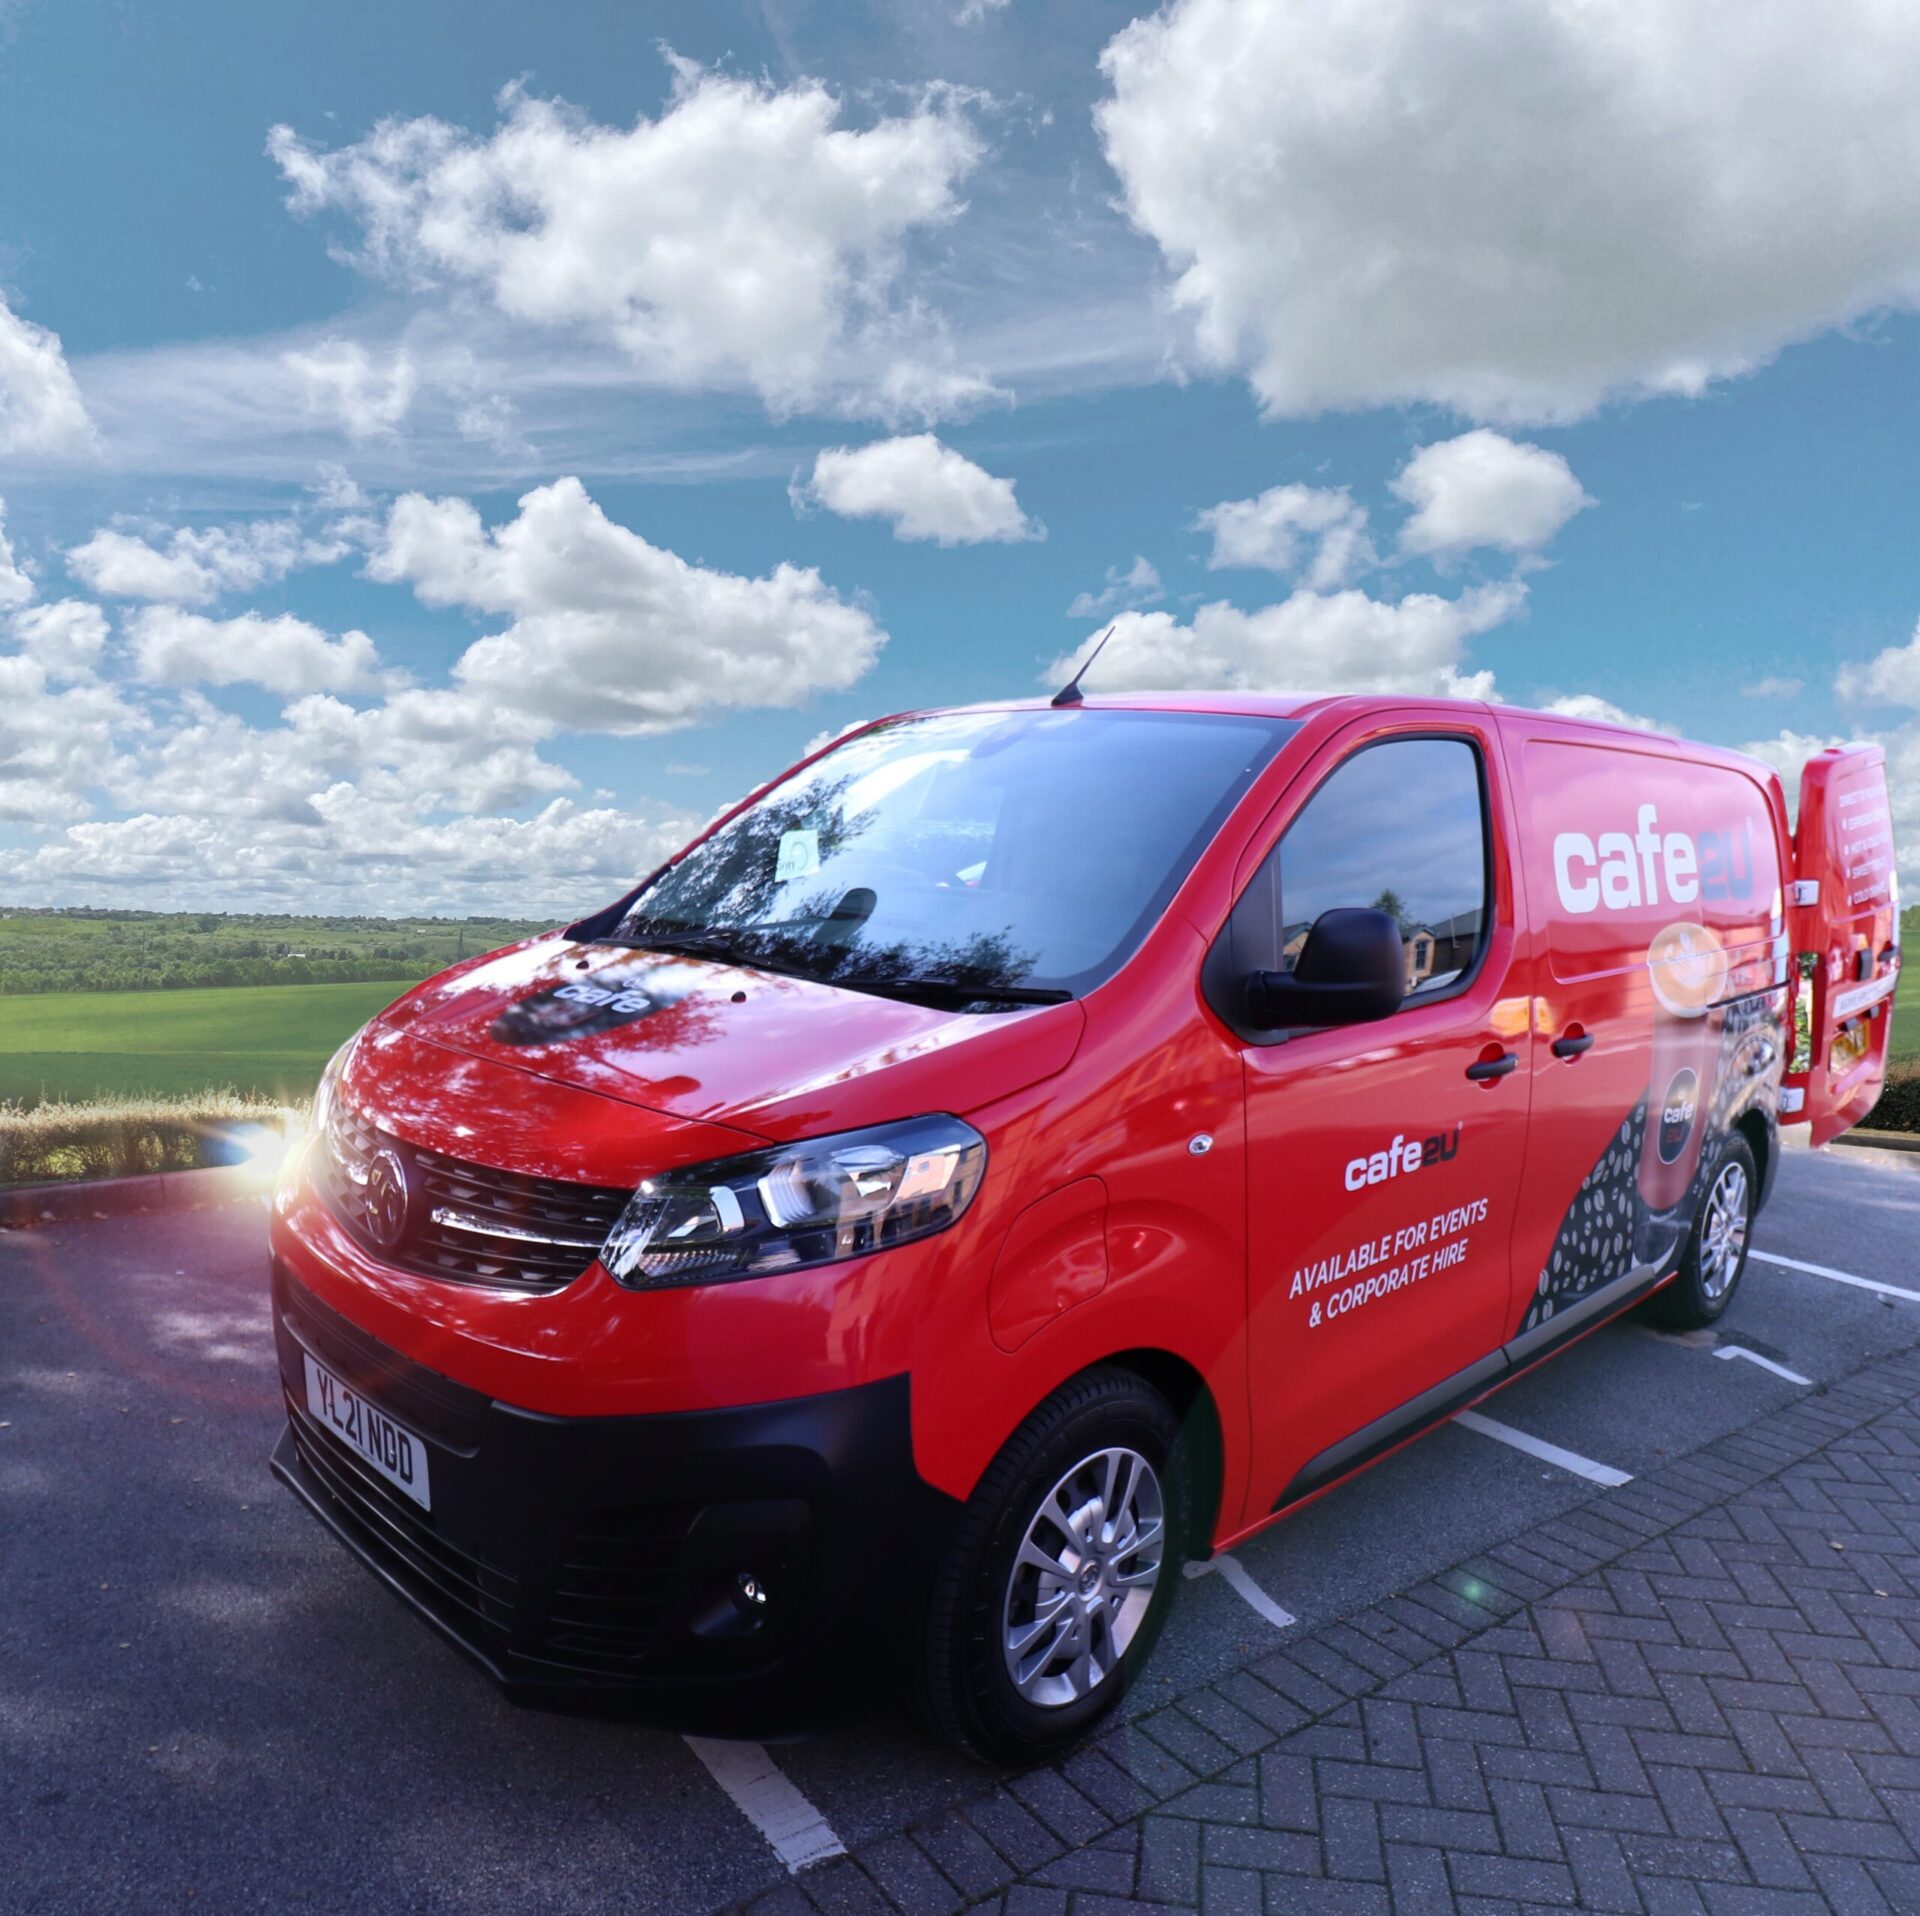 Red Van Goes Green: Cafe2U Launches World’s First All-Electric Coffee Van